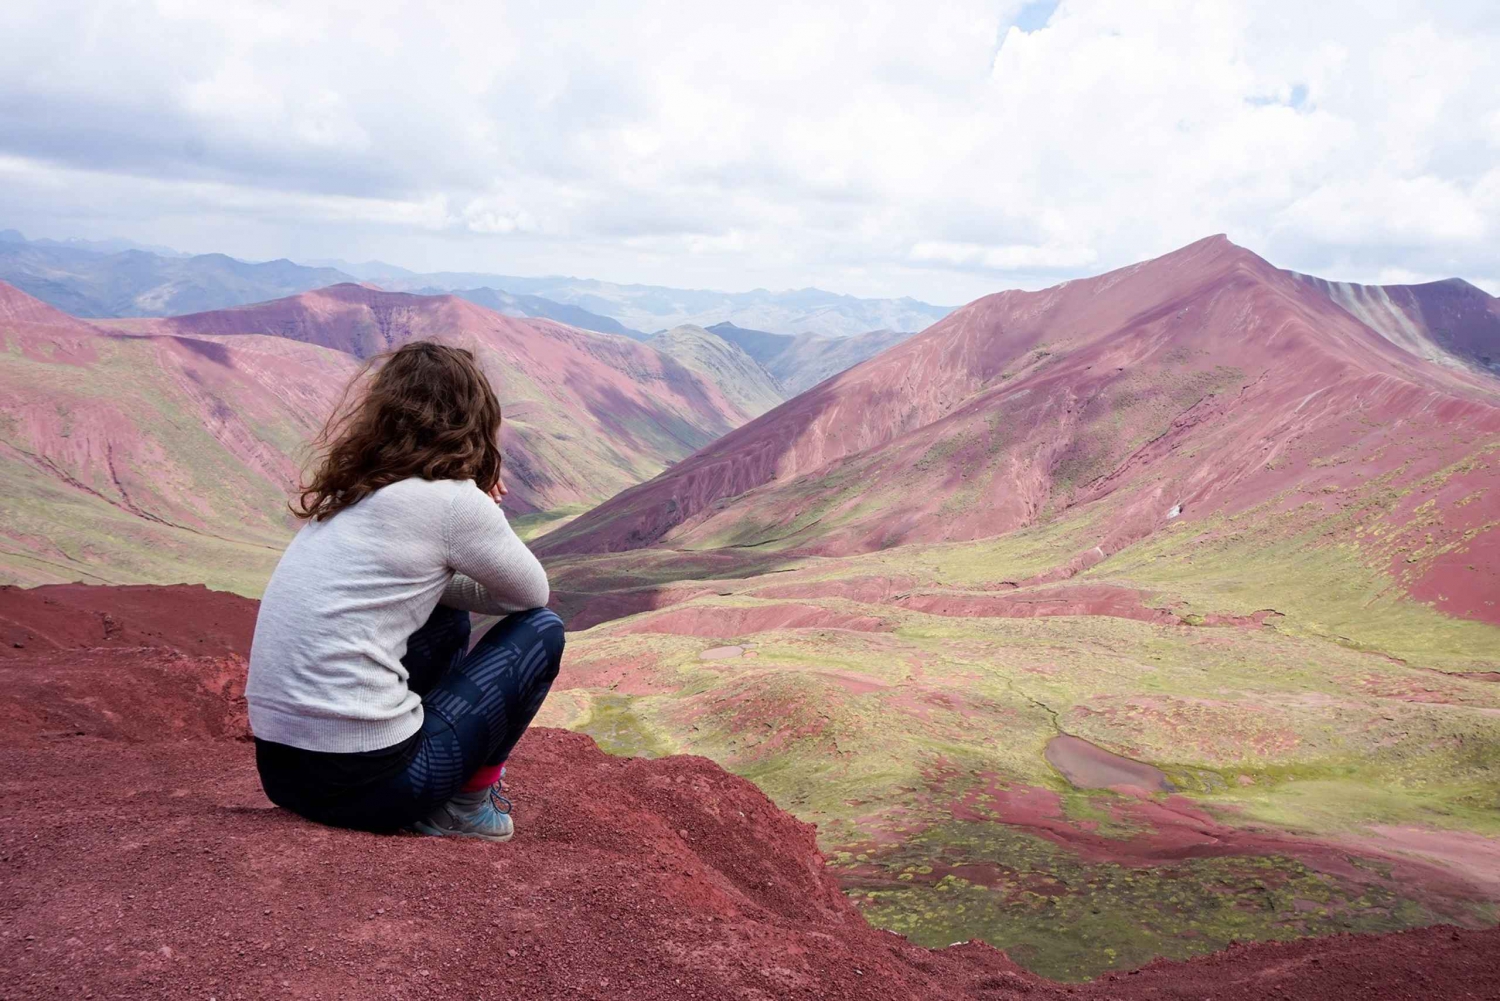 Peru: Rainbow Mountain and Red Valley Full Day Tour